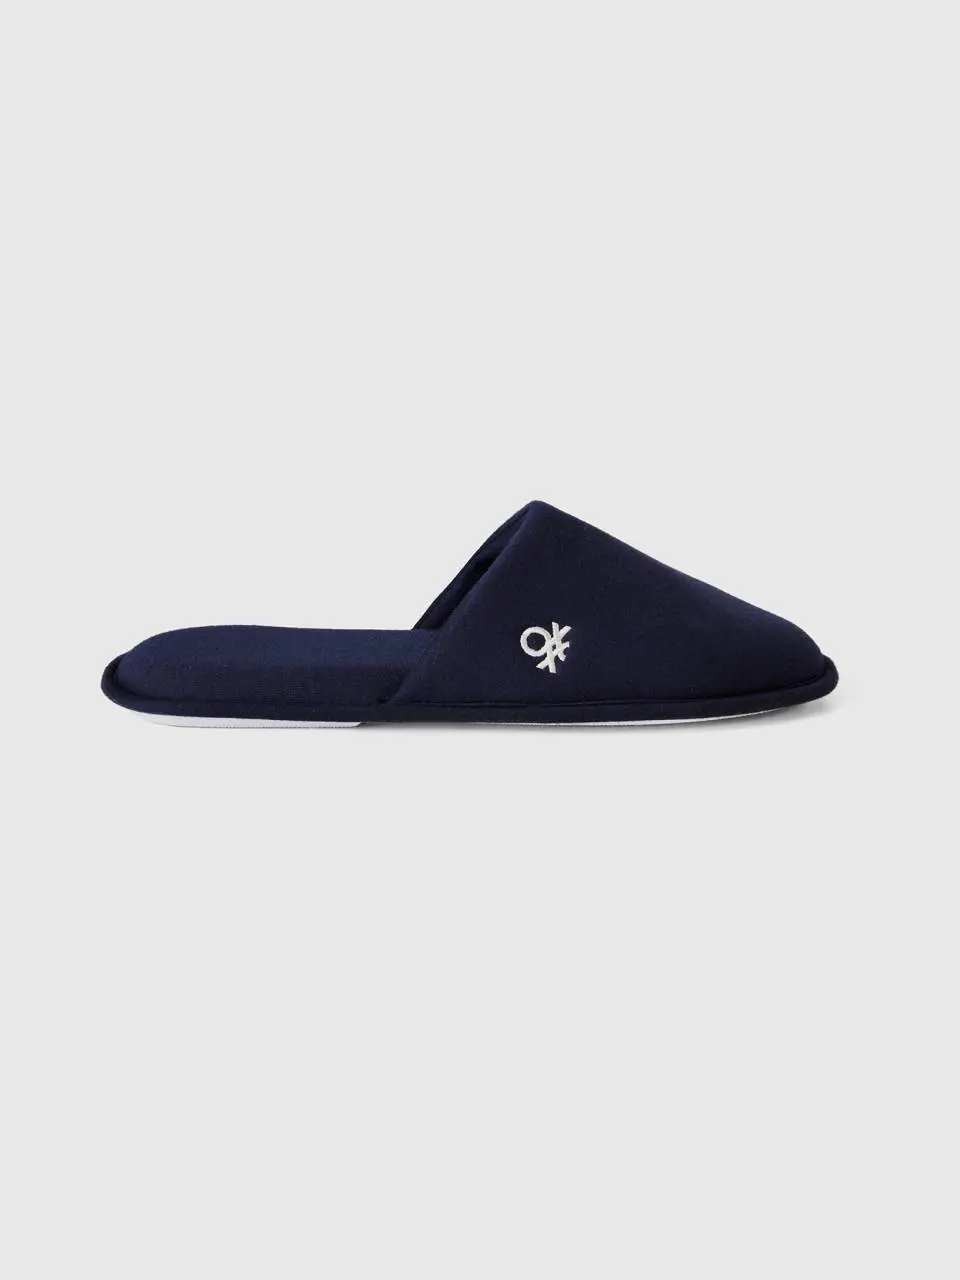 Benetton slippers with logo embroidery. 1